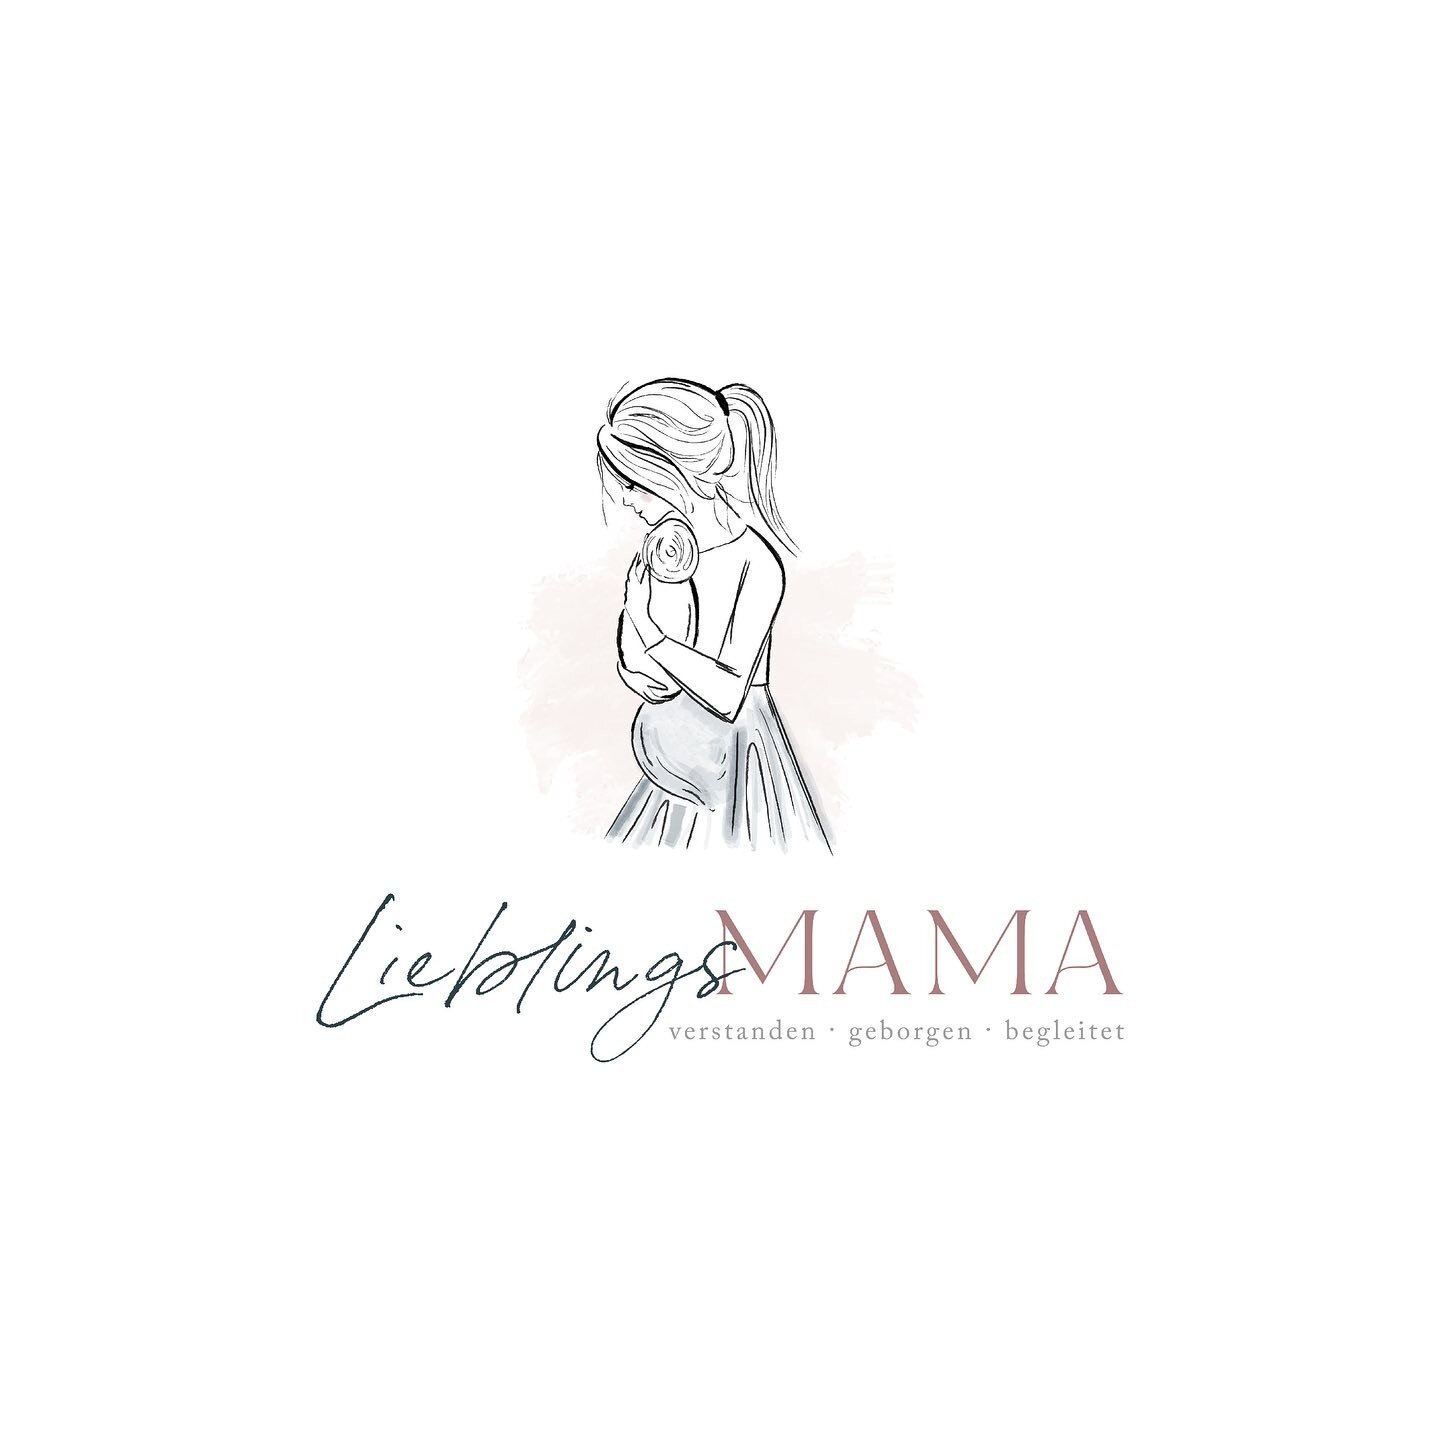 Logo Design for @_lieblingsmama_ ✨
We worked here on a fashion-styled illustration with a watercolor effect, really love how it turned out. The website design I made for her has also very beautiful watercolor backgrounds, check it out at www.liebling